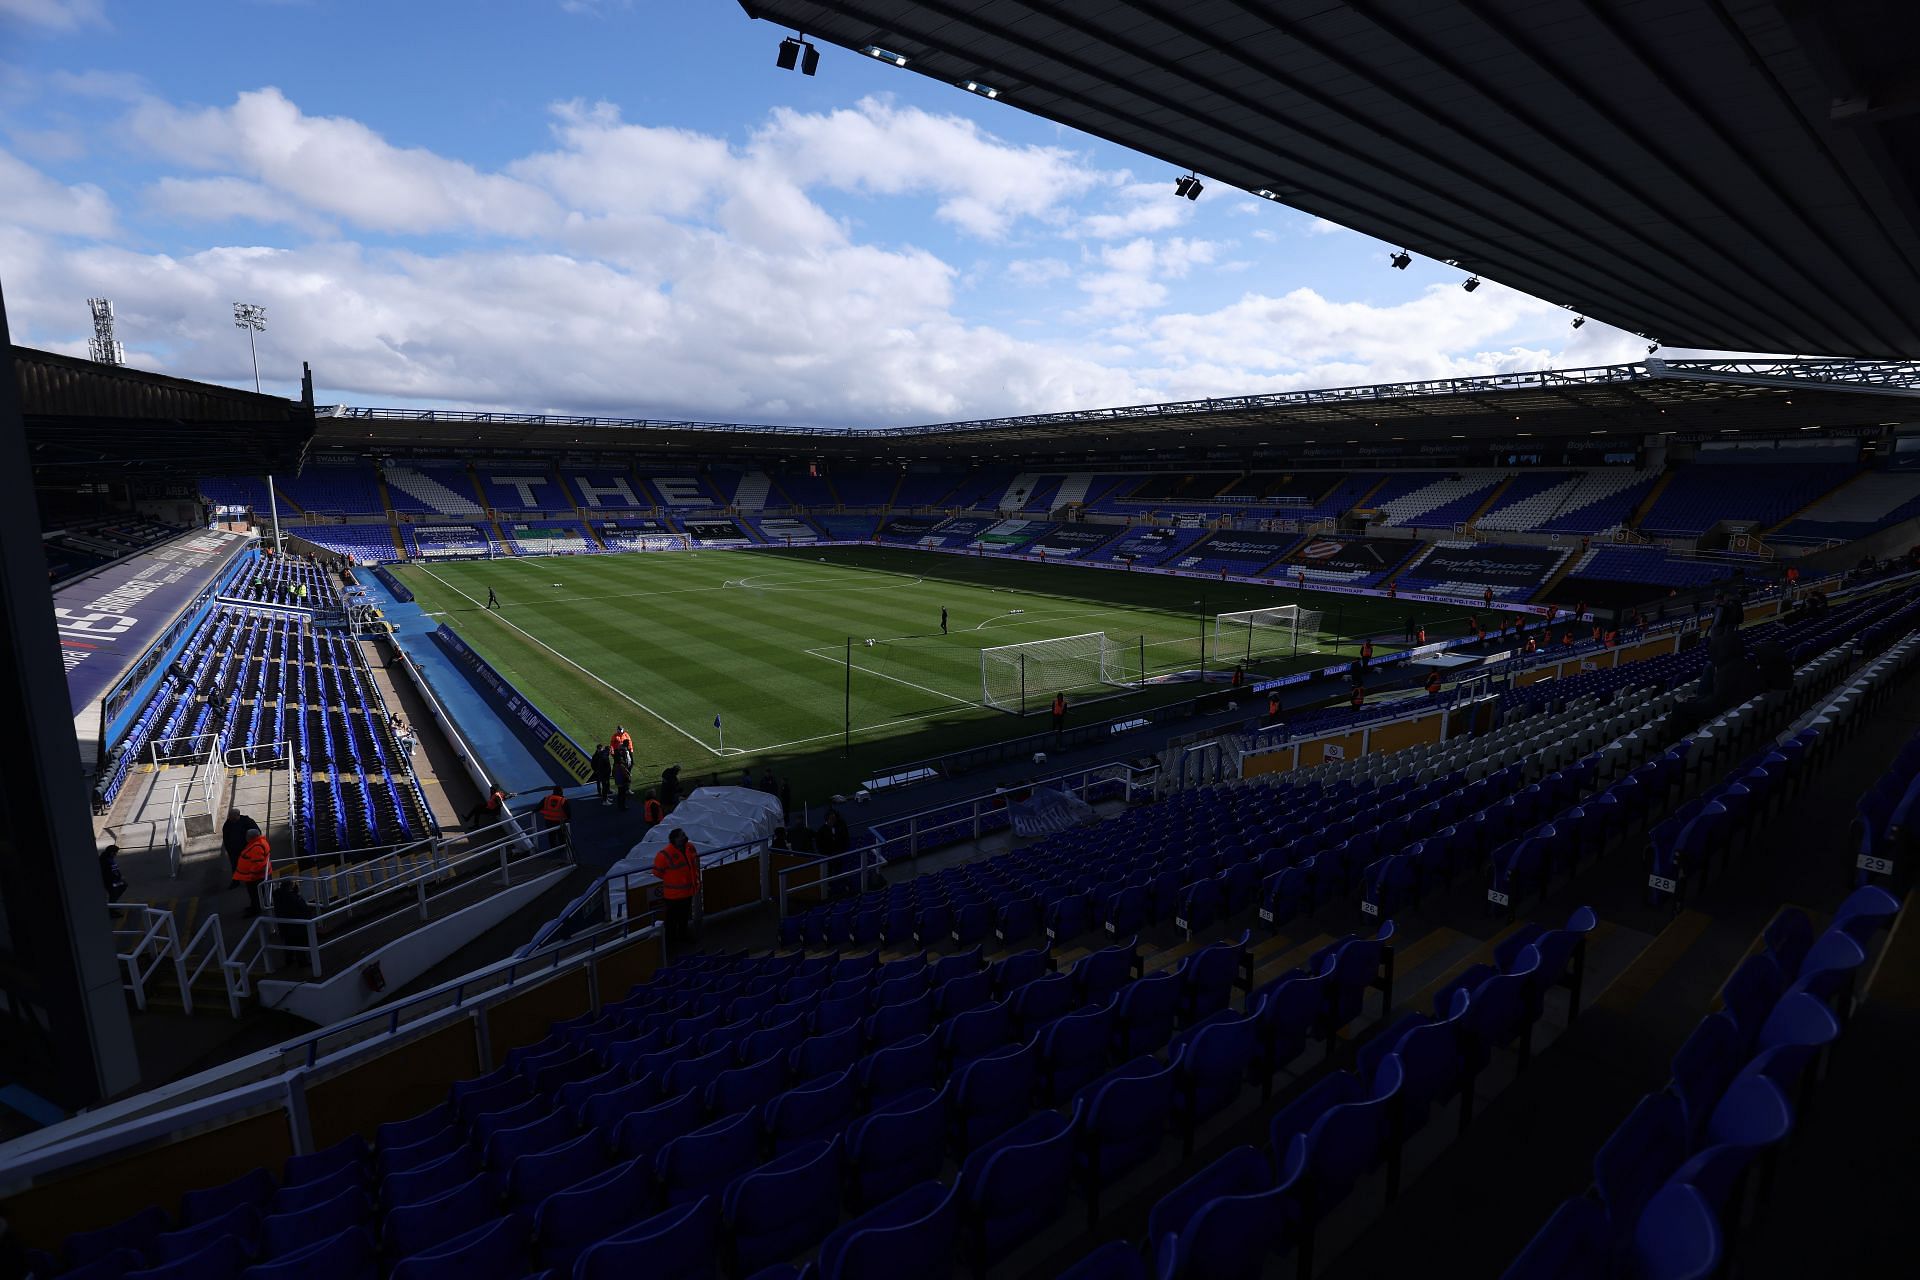 Birmingham City will host Middlesbrough on Tuesday - Sky Bet Championship